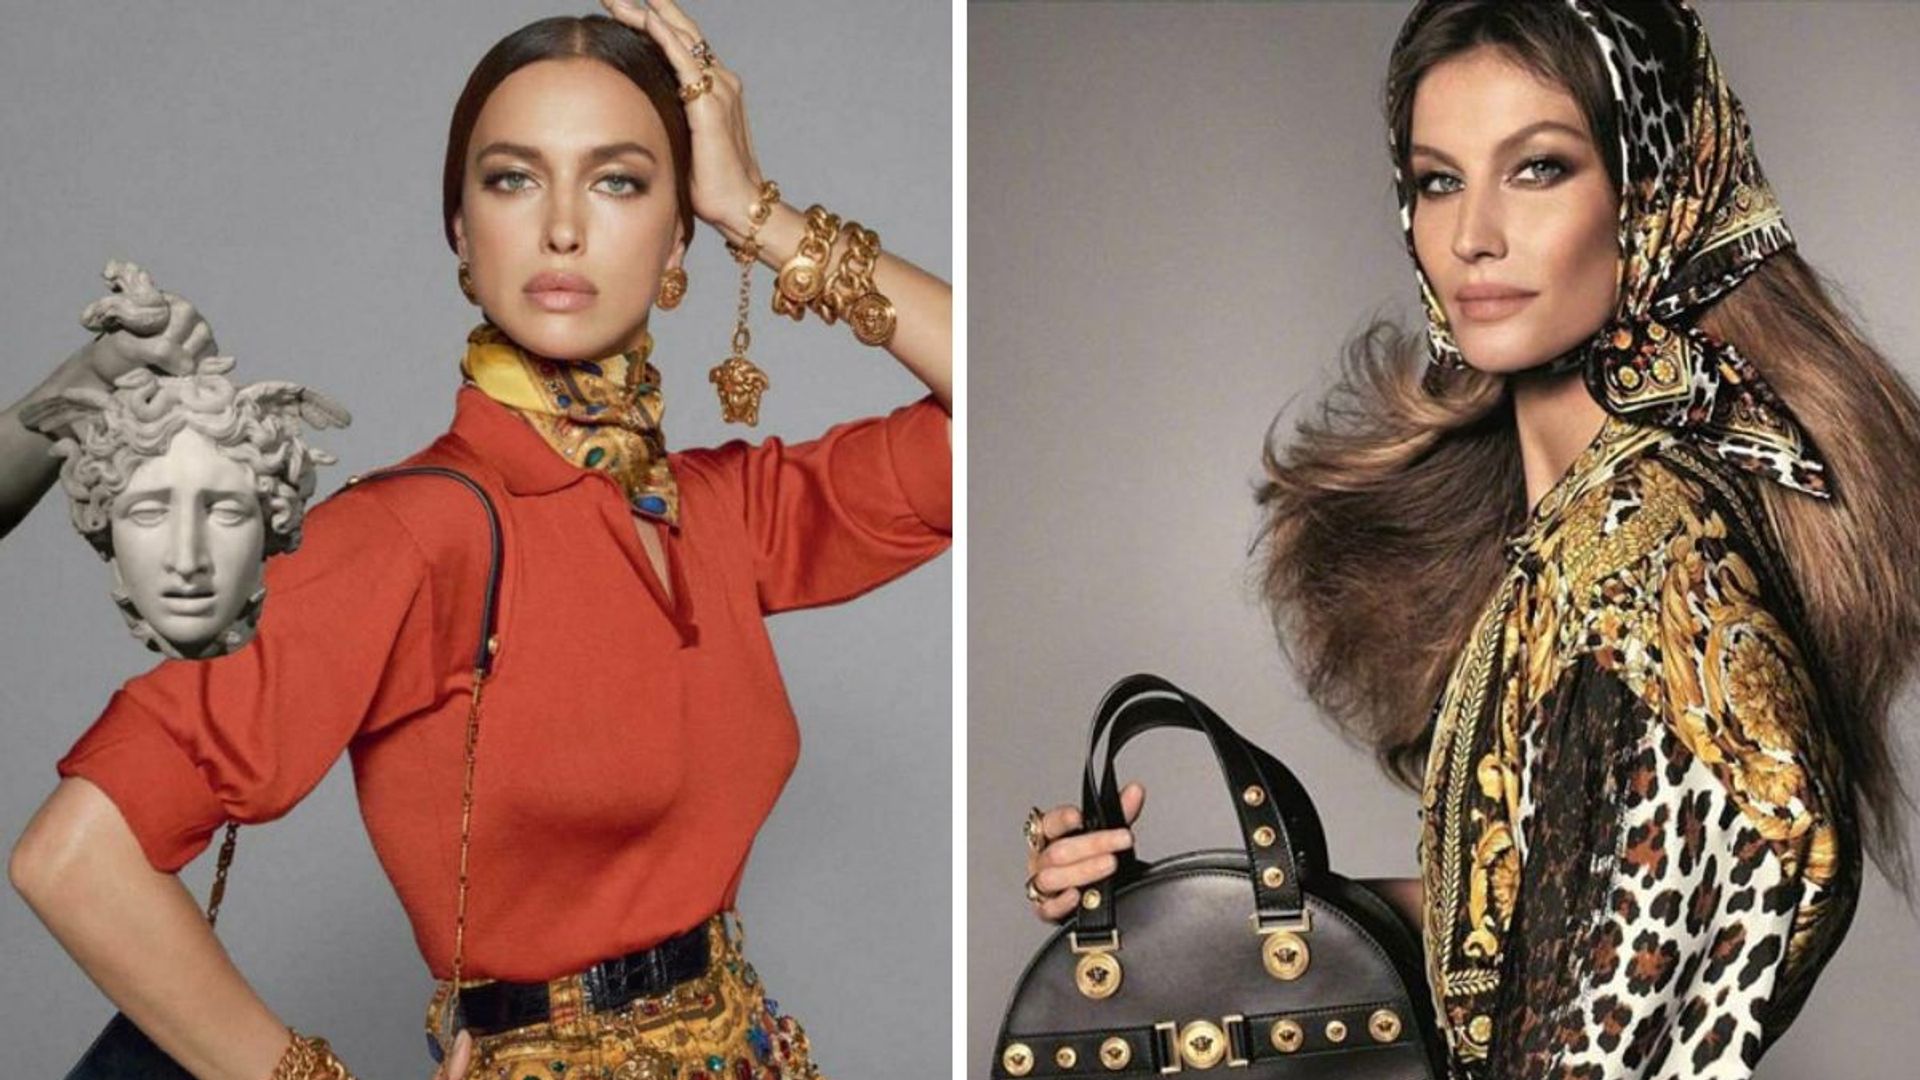 Every time Irina Shayk and Gisele Bündchen's modelling careers have overlapped